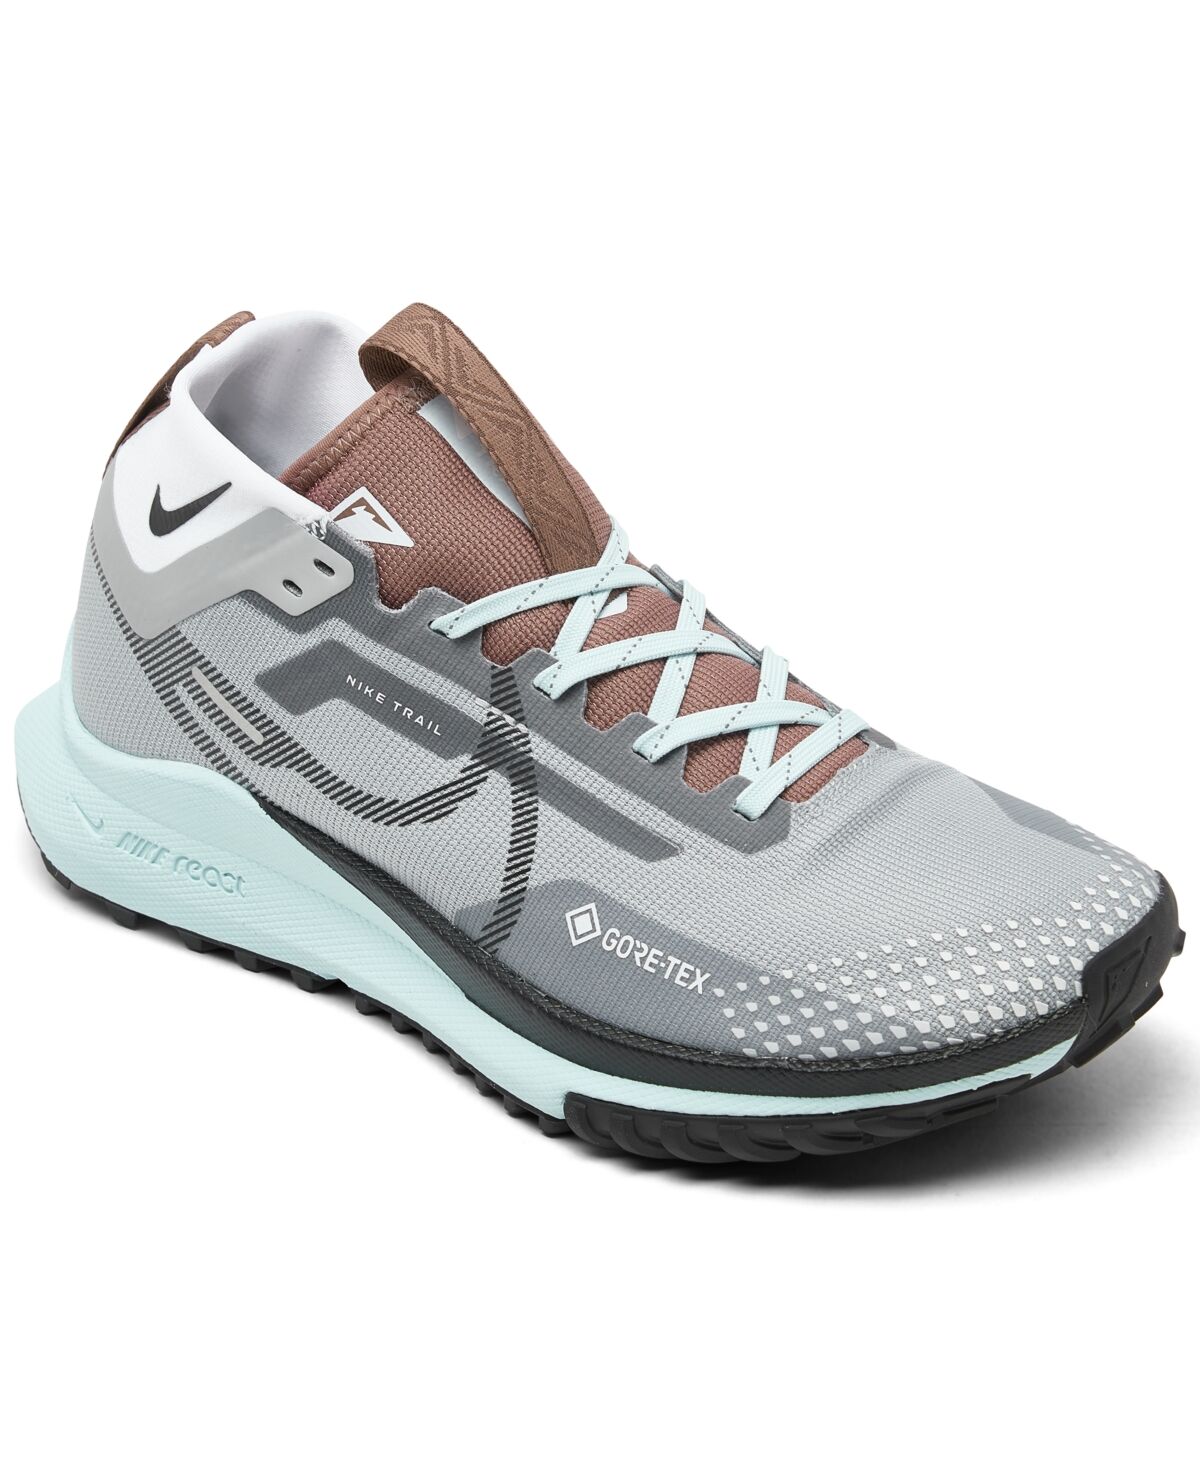 Nike Women's React Pegasus Trail 4 Gore-tex Water-resistant Trail Running Sneakers from Finish Line - Light Smoke Gray, Glacier